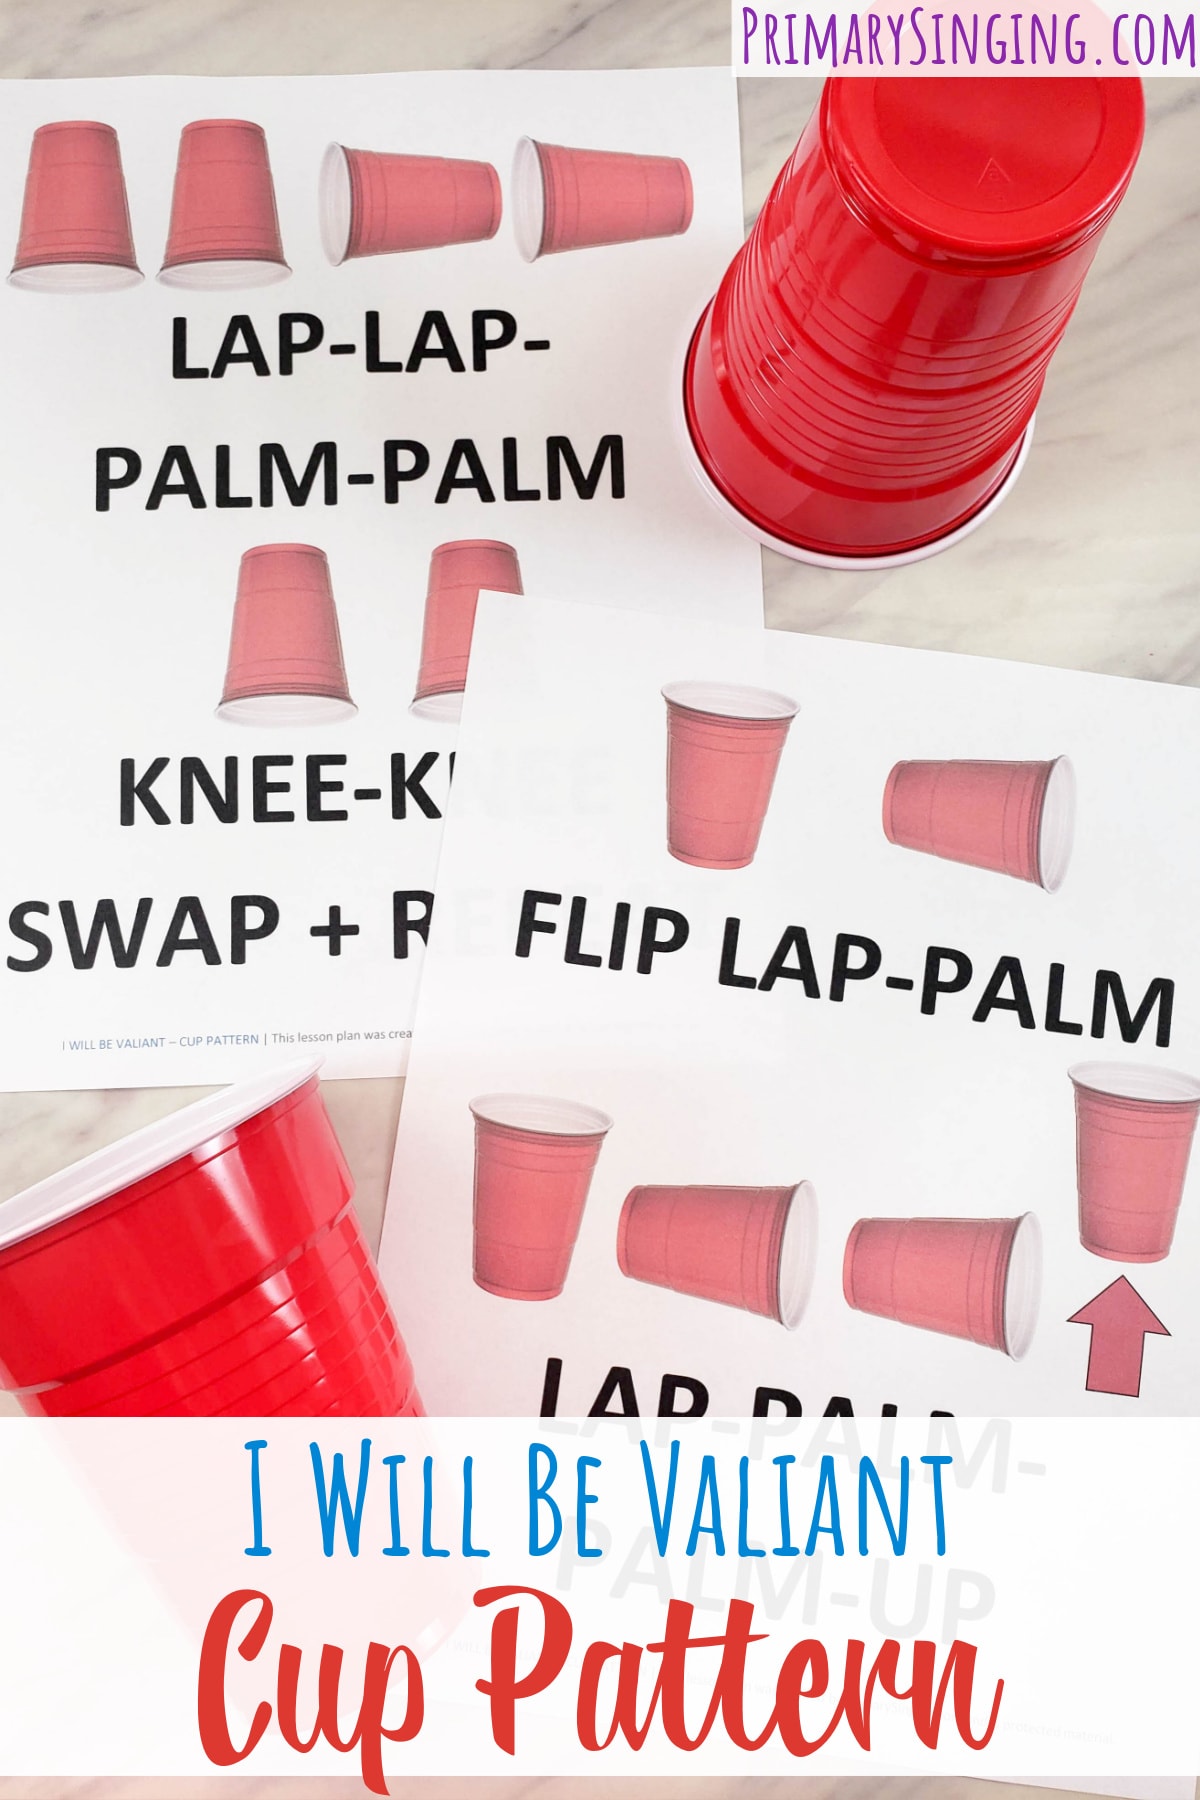 I Will Be Valiant cup patterns singing time idea is a fun way to make the music come alive! Includes demo video and printable song helps for LDS Primary music leaders.